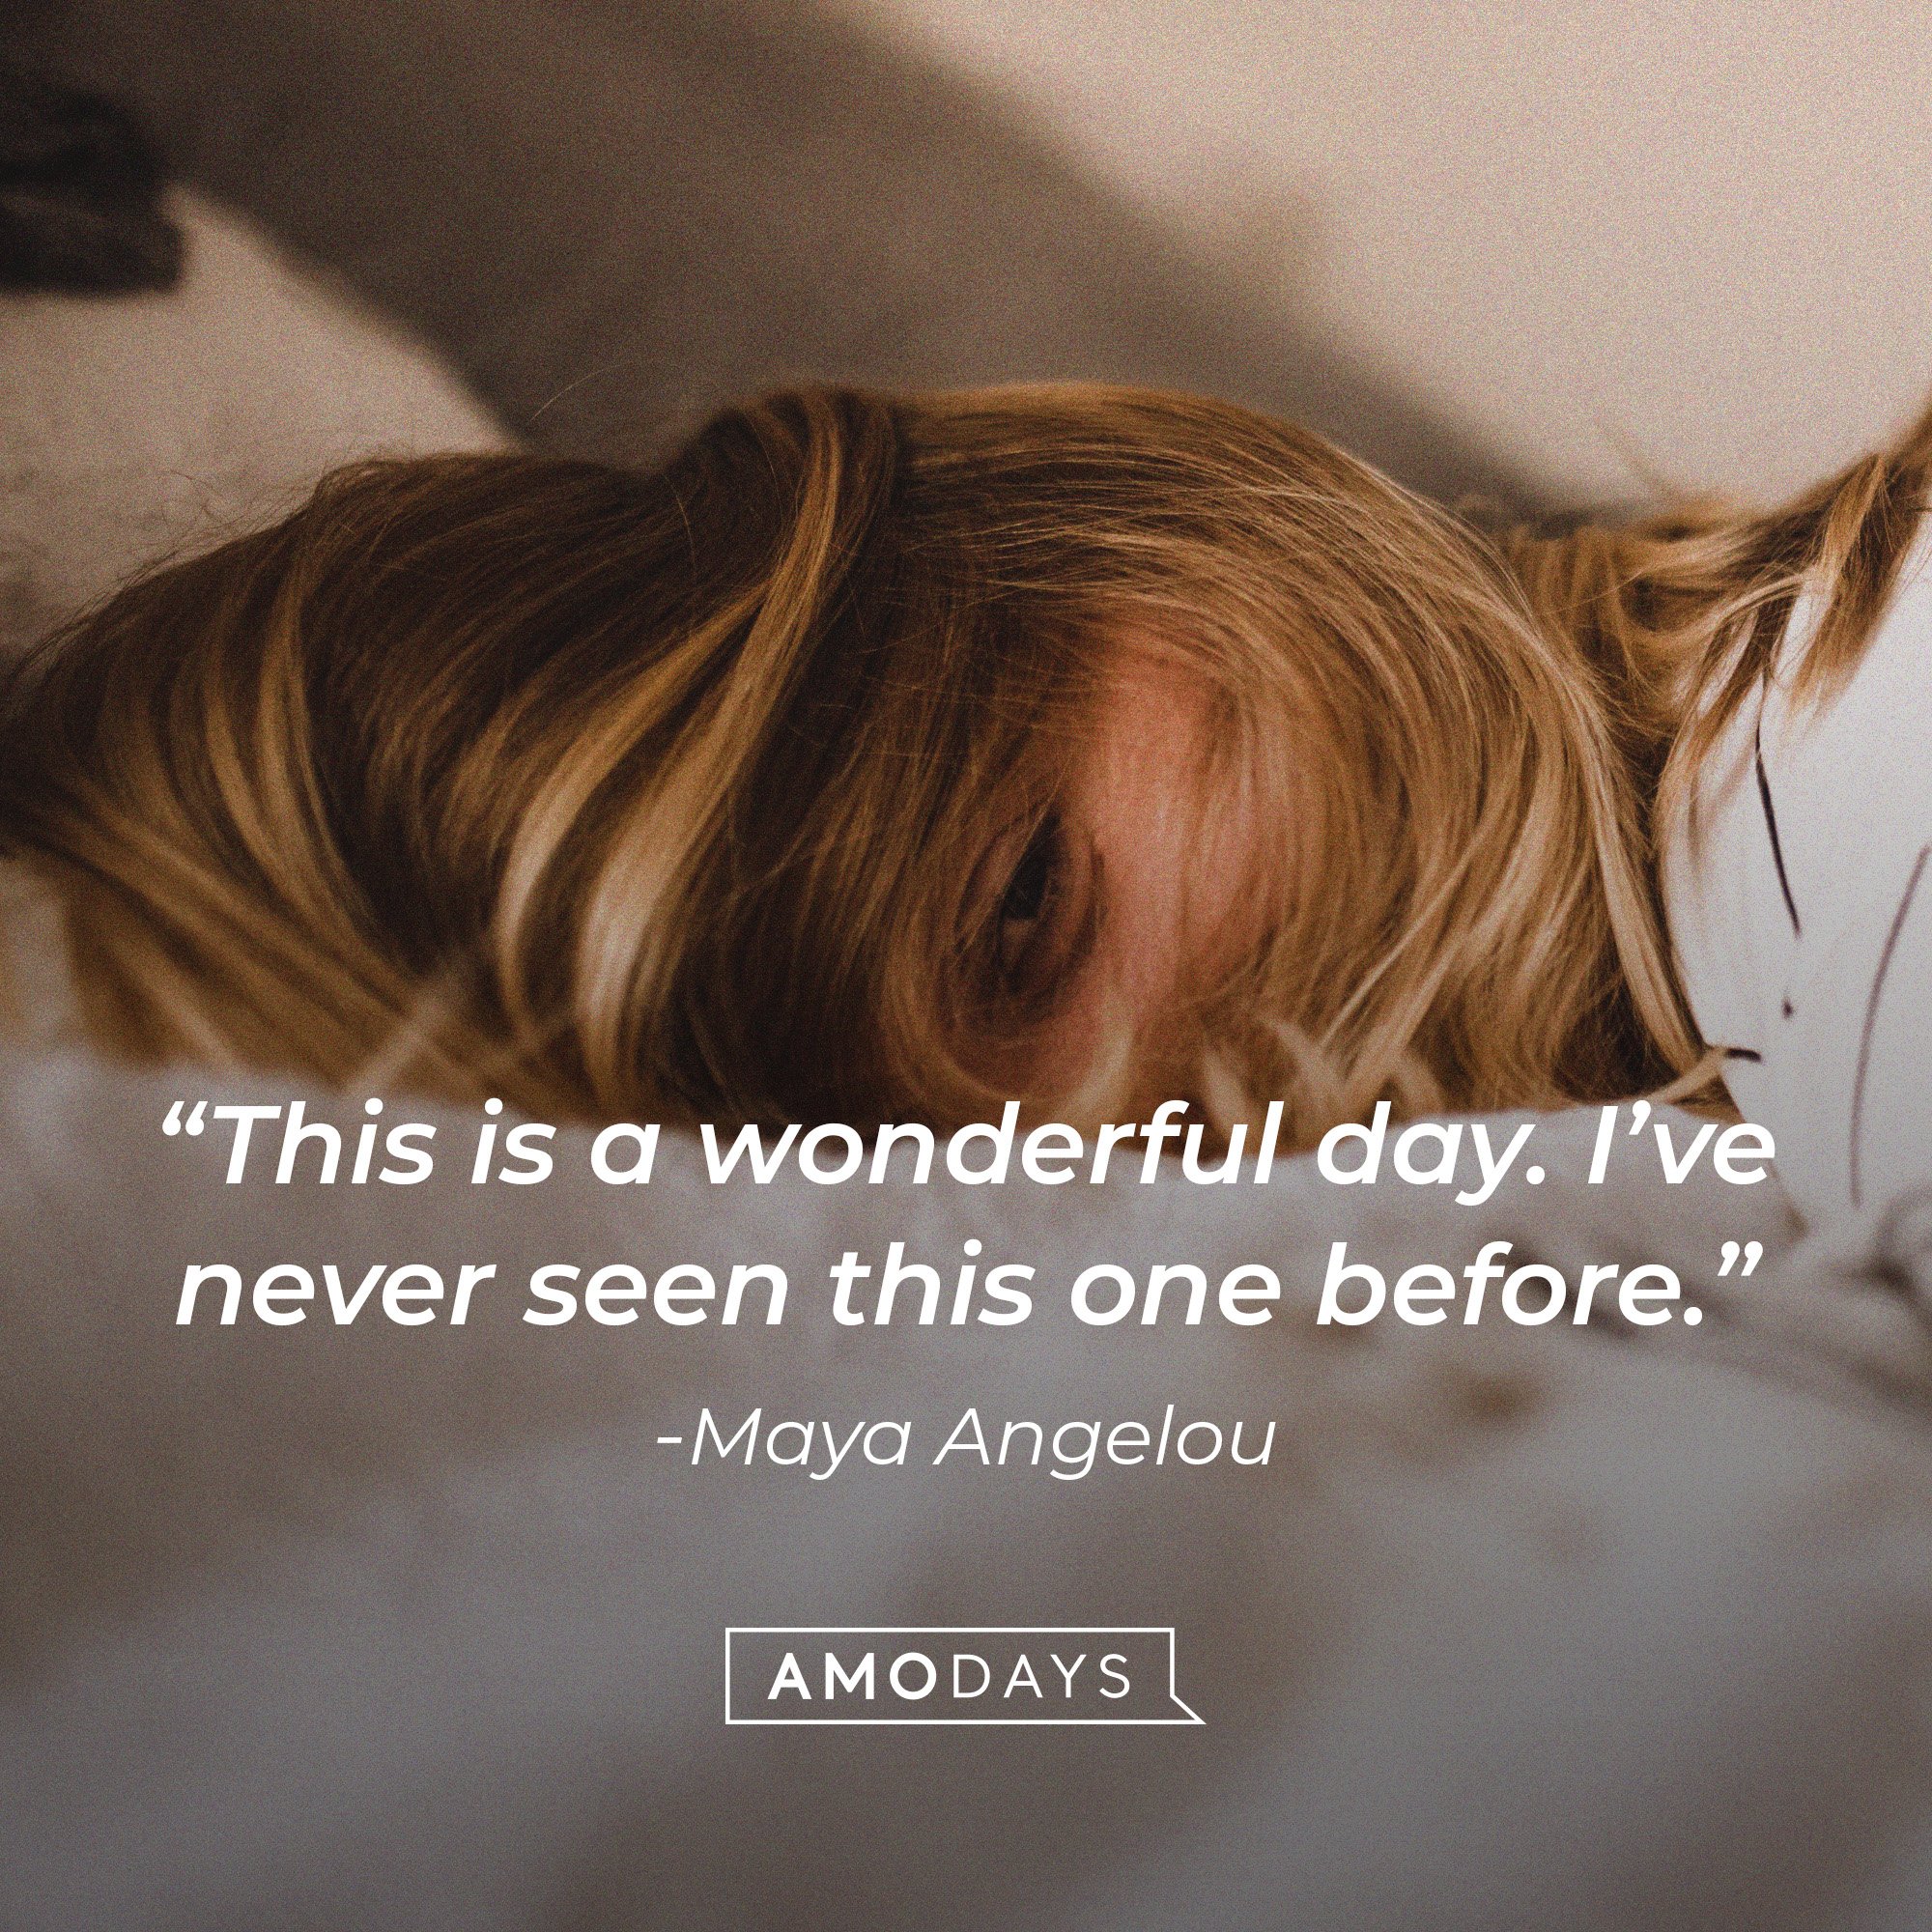 Maya Angelou's quote: “This a wonderful day. I’ve never seen this one before.” | Image: AmoDays 